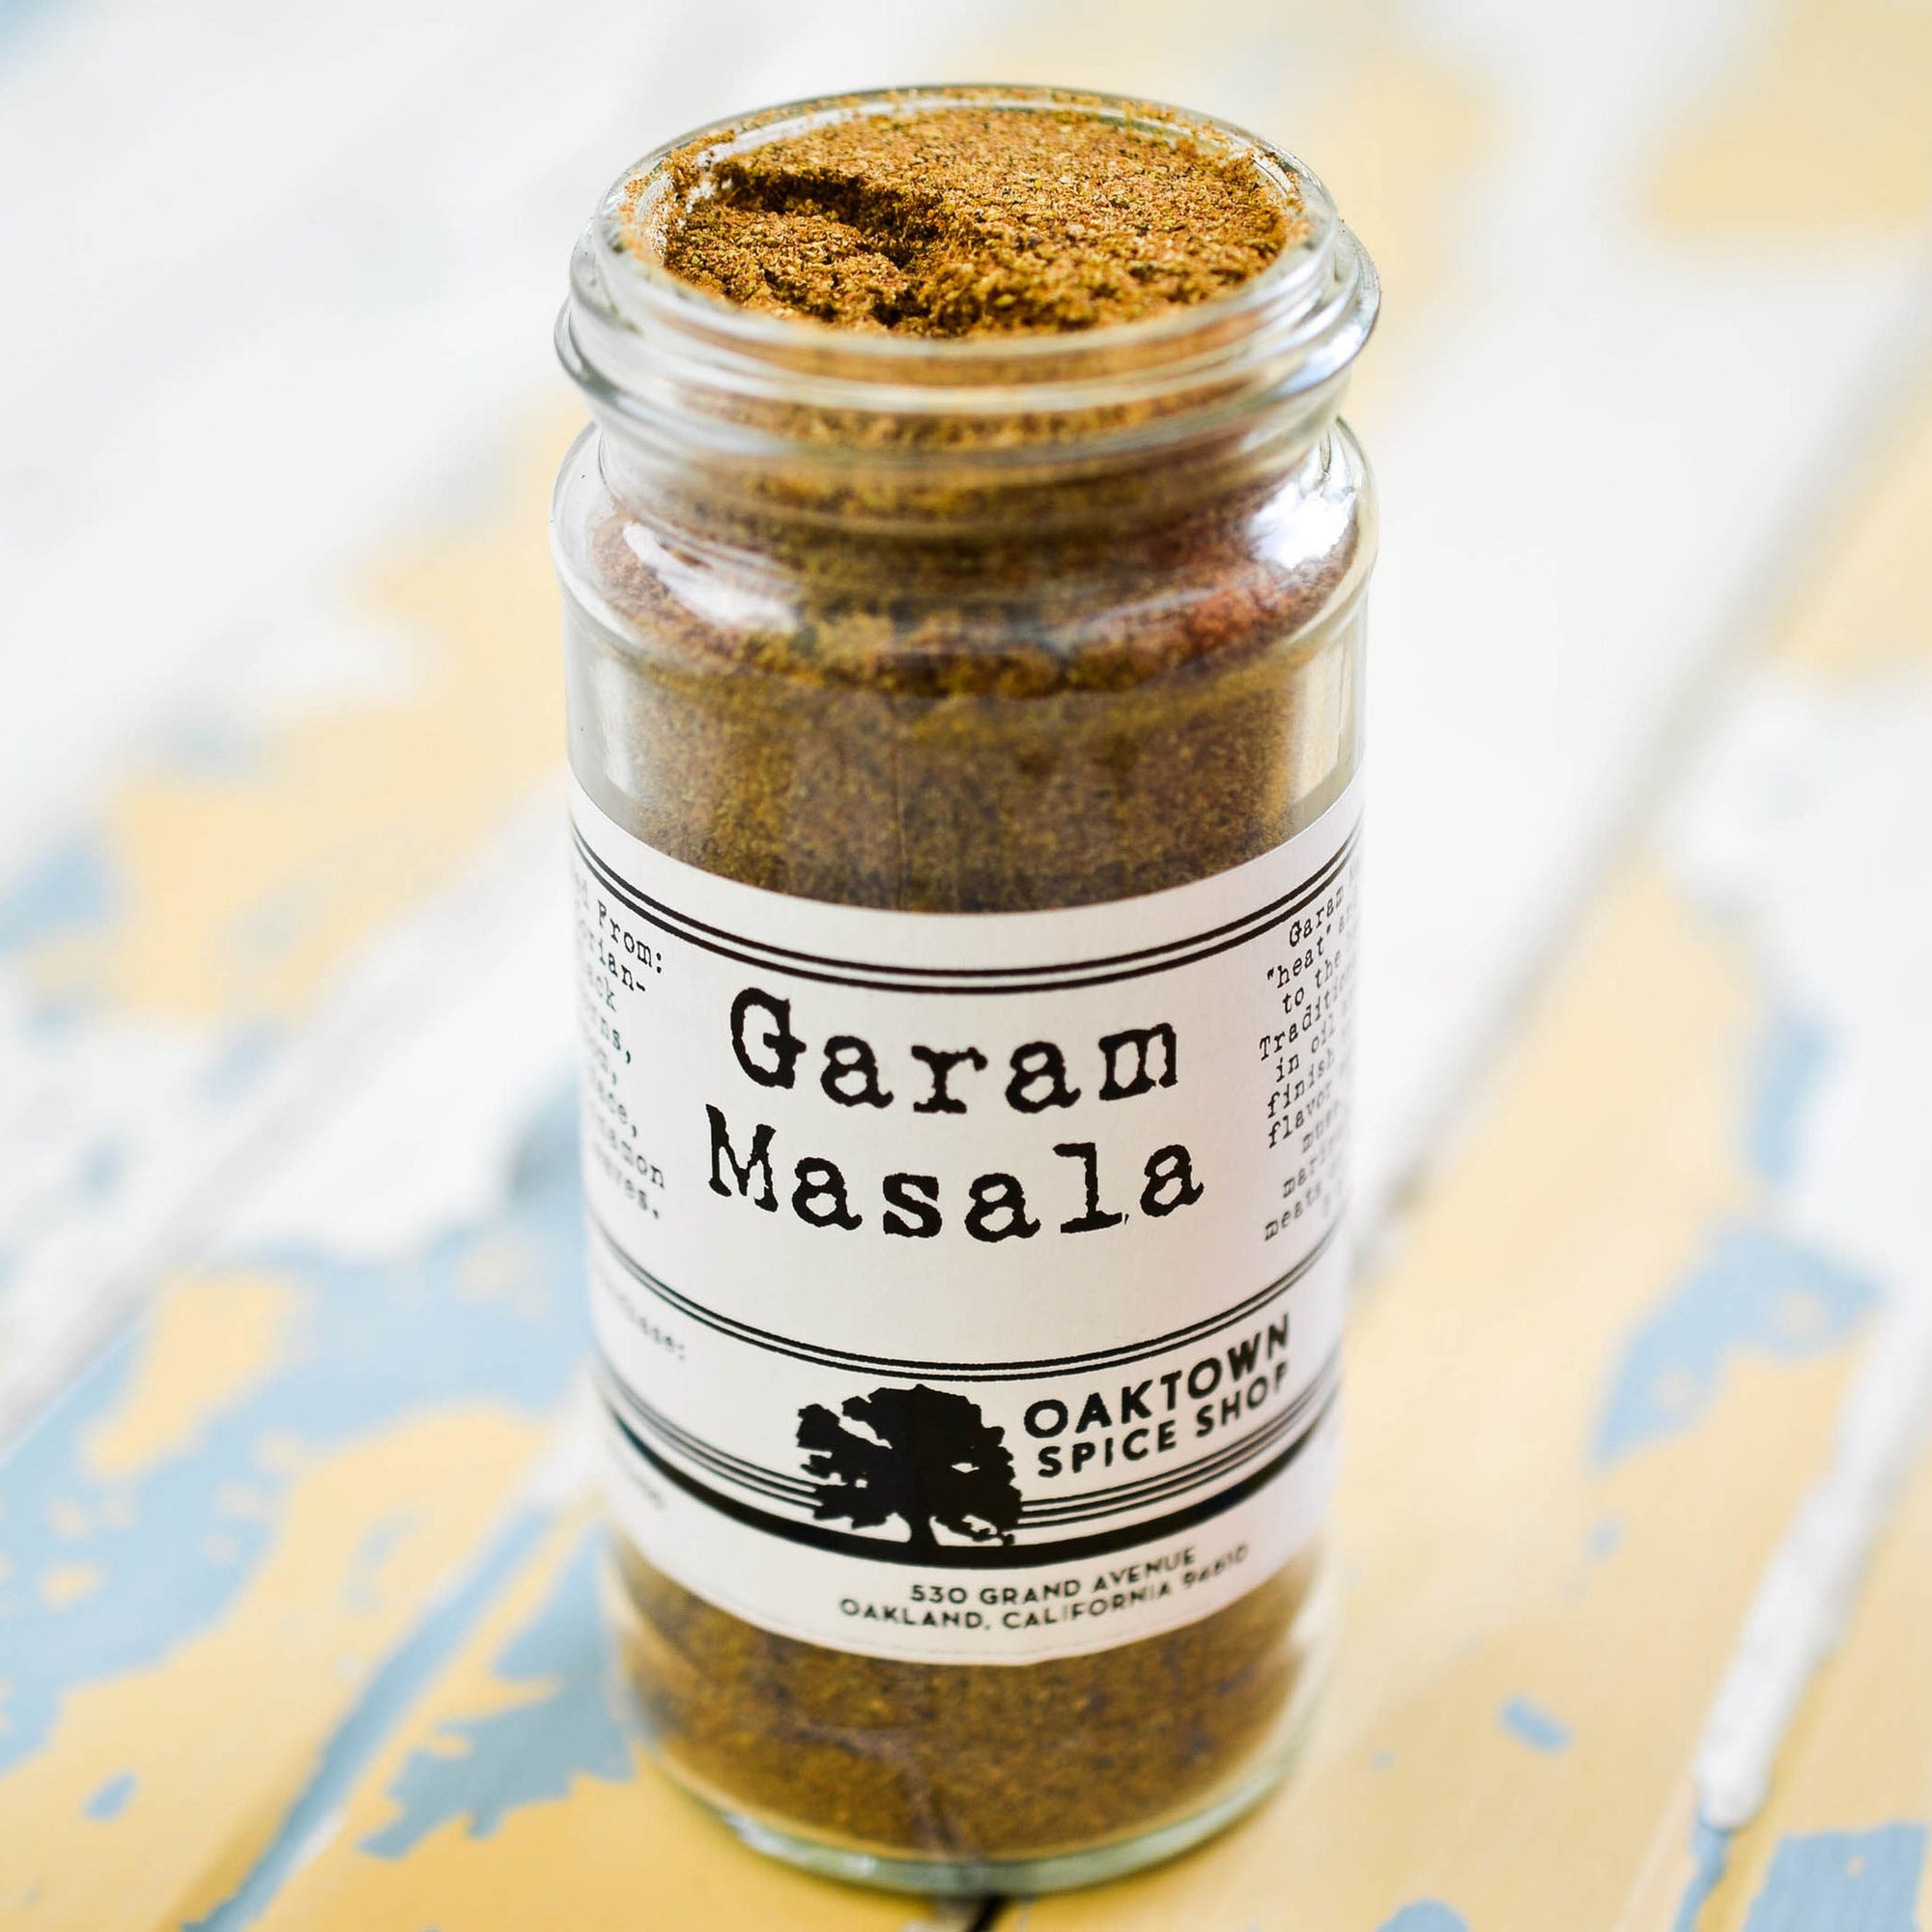 Garam Masala. This blend combines the sweet notes of cinnamon and cardamom and the more savory flavors of bay leaves and black peppercorns, among other spices. Hand Mixed Spice Blend by Oaktown Spice Shop